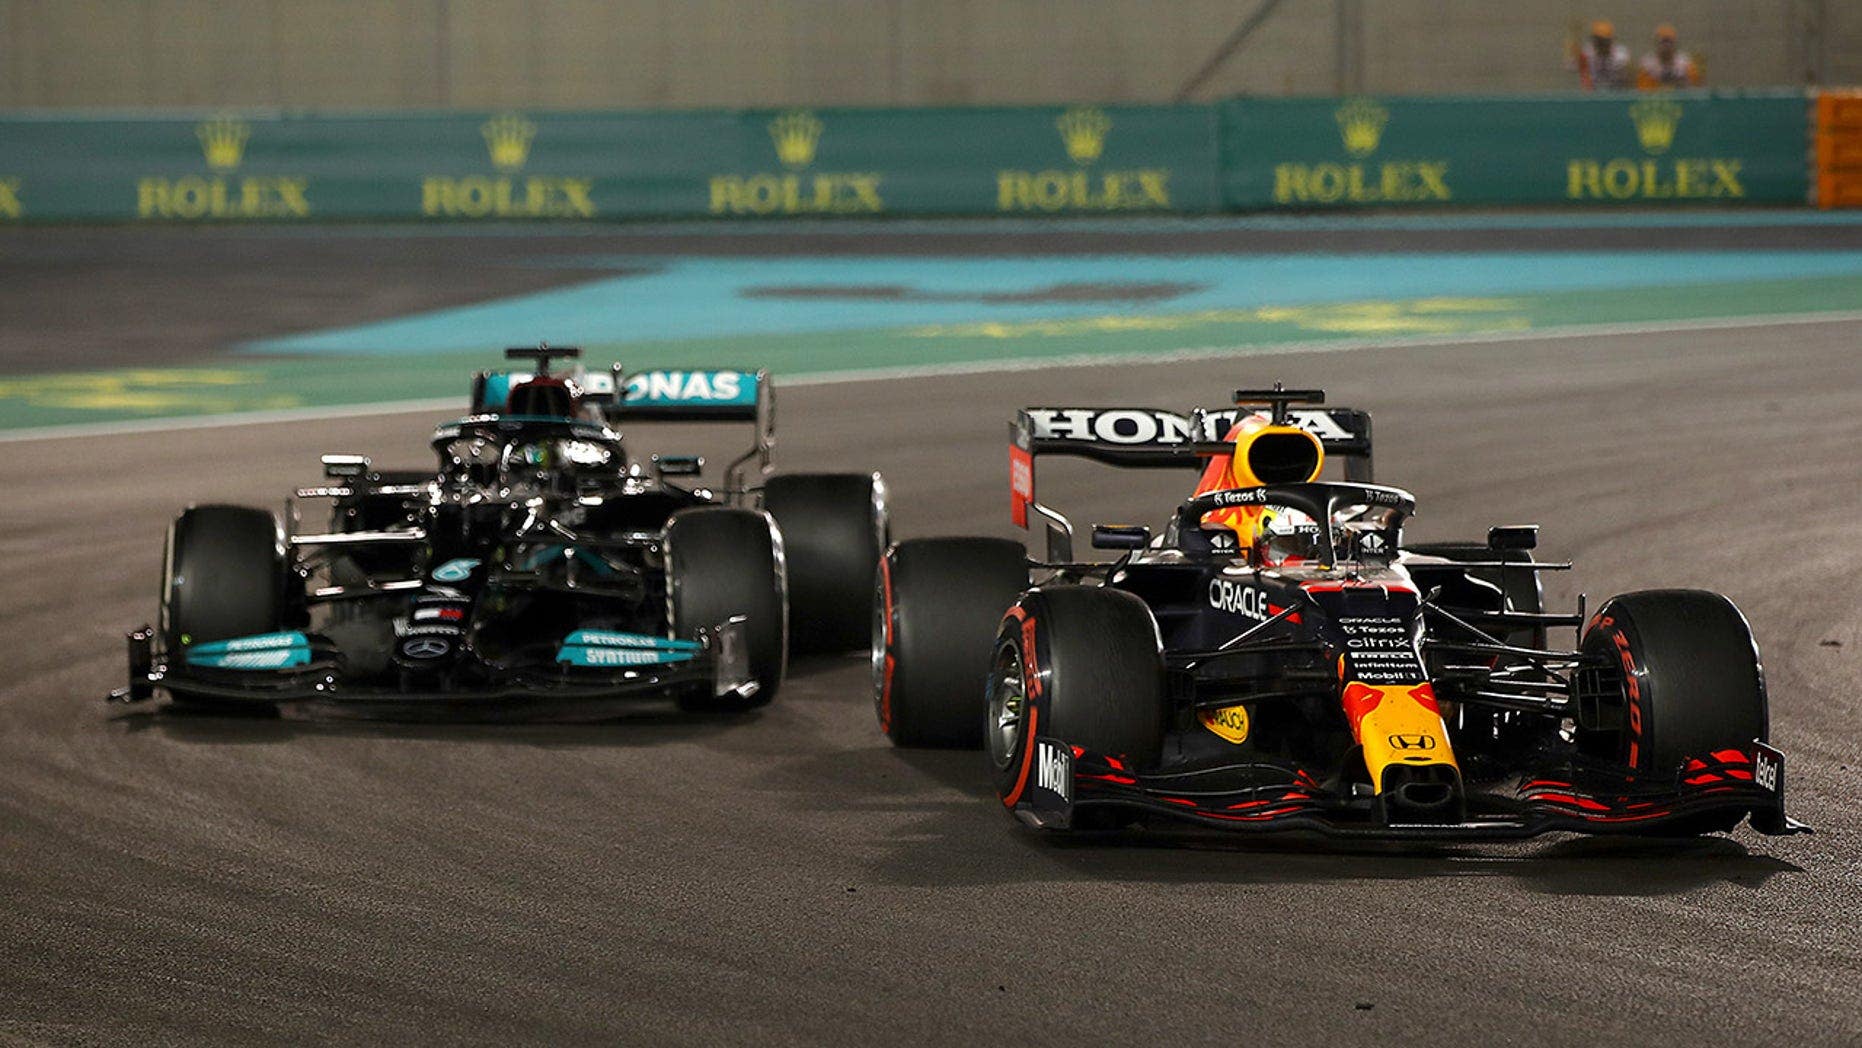 Mercedes withdraws Formula One championship protest, but says it lost 'faith in racing'